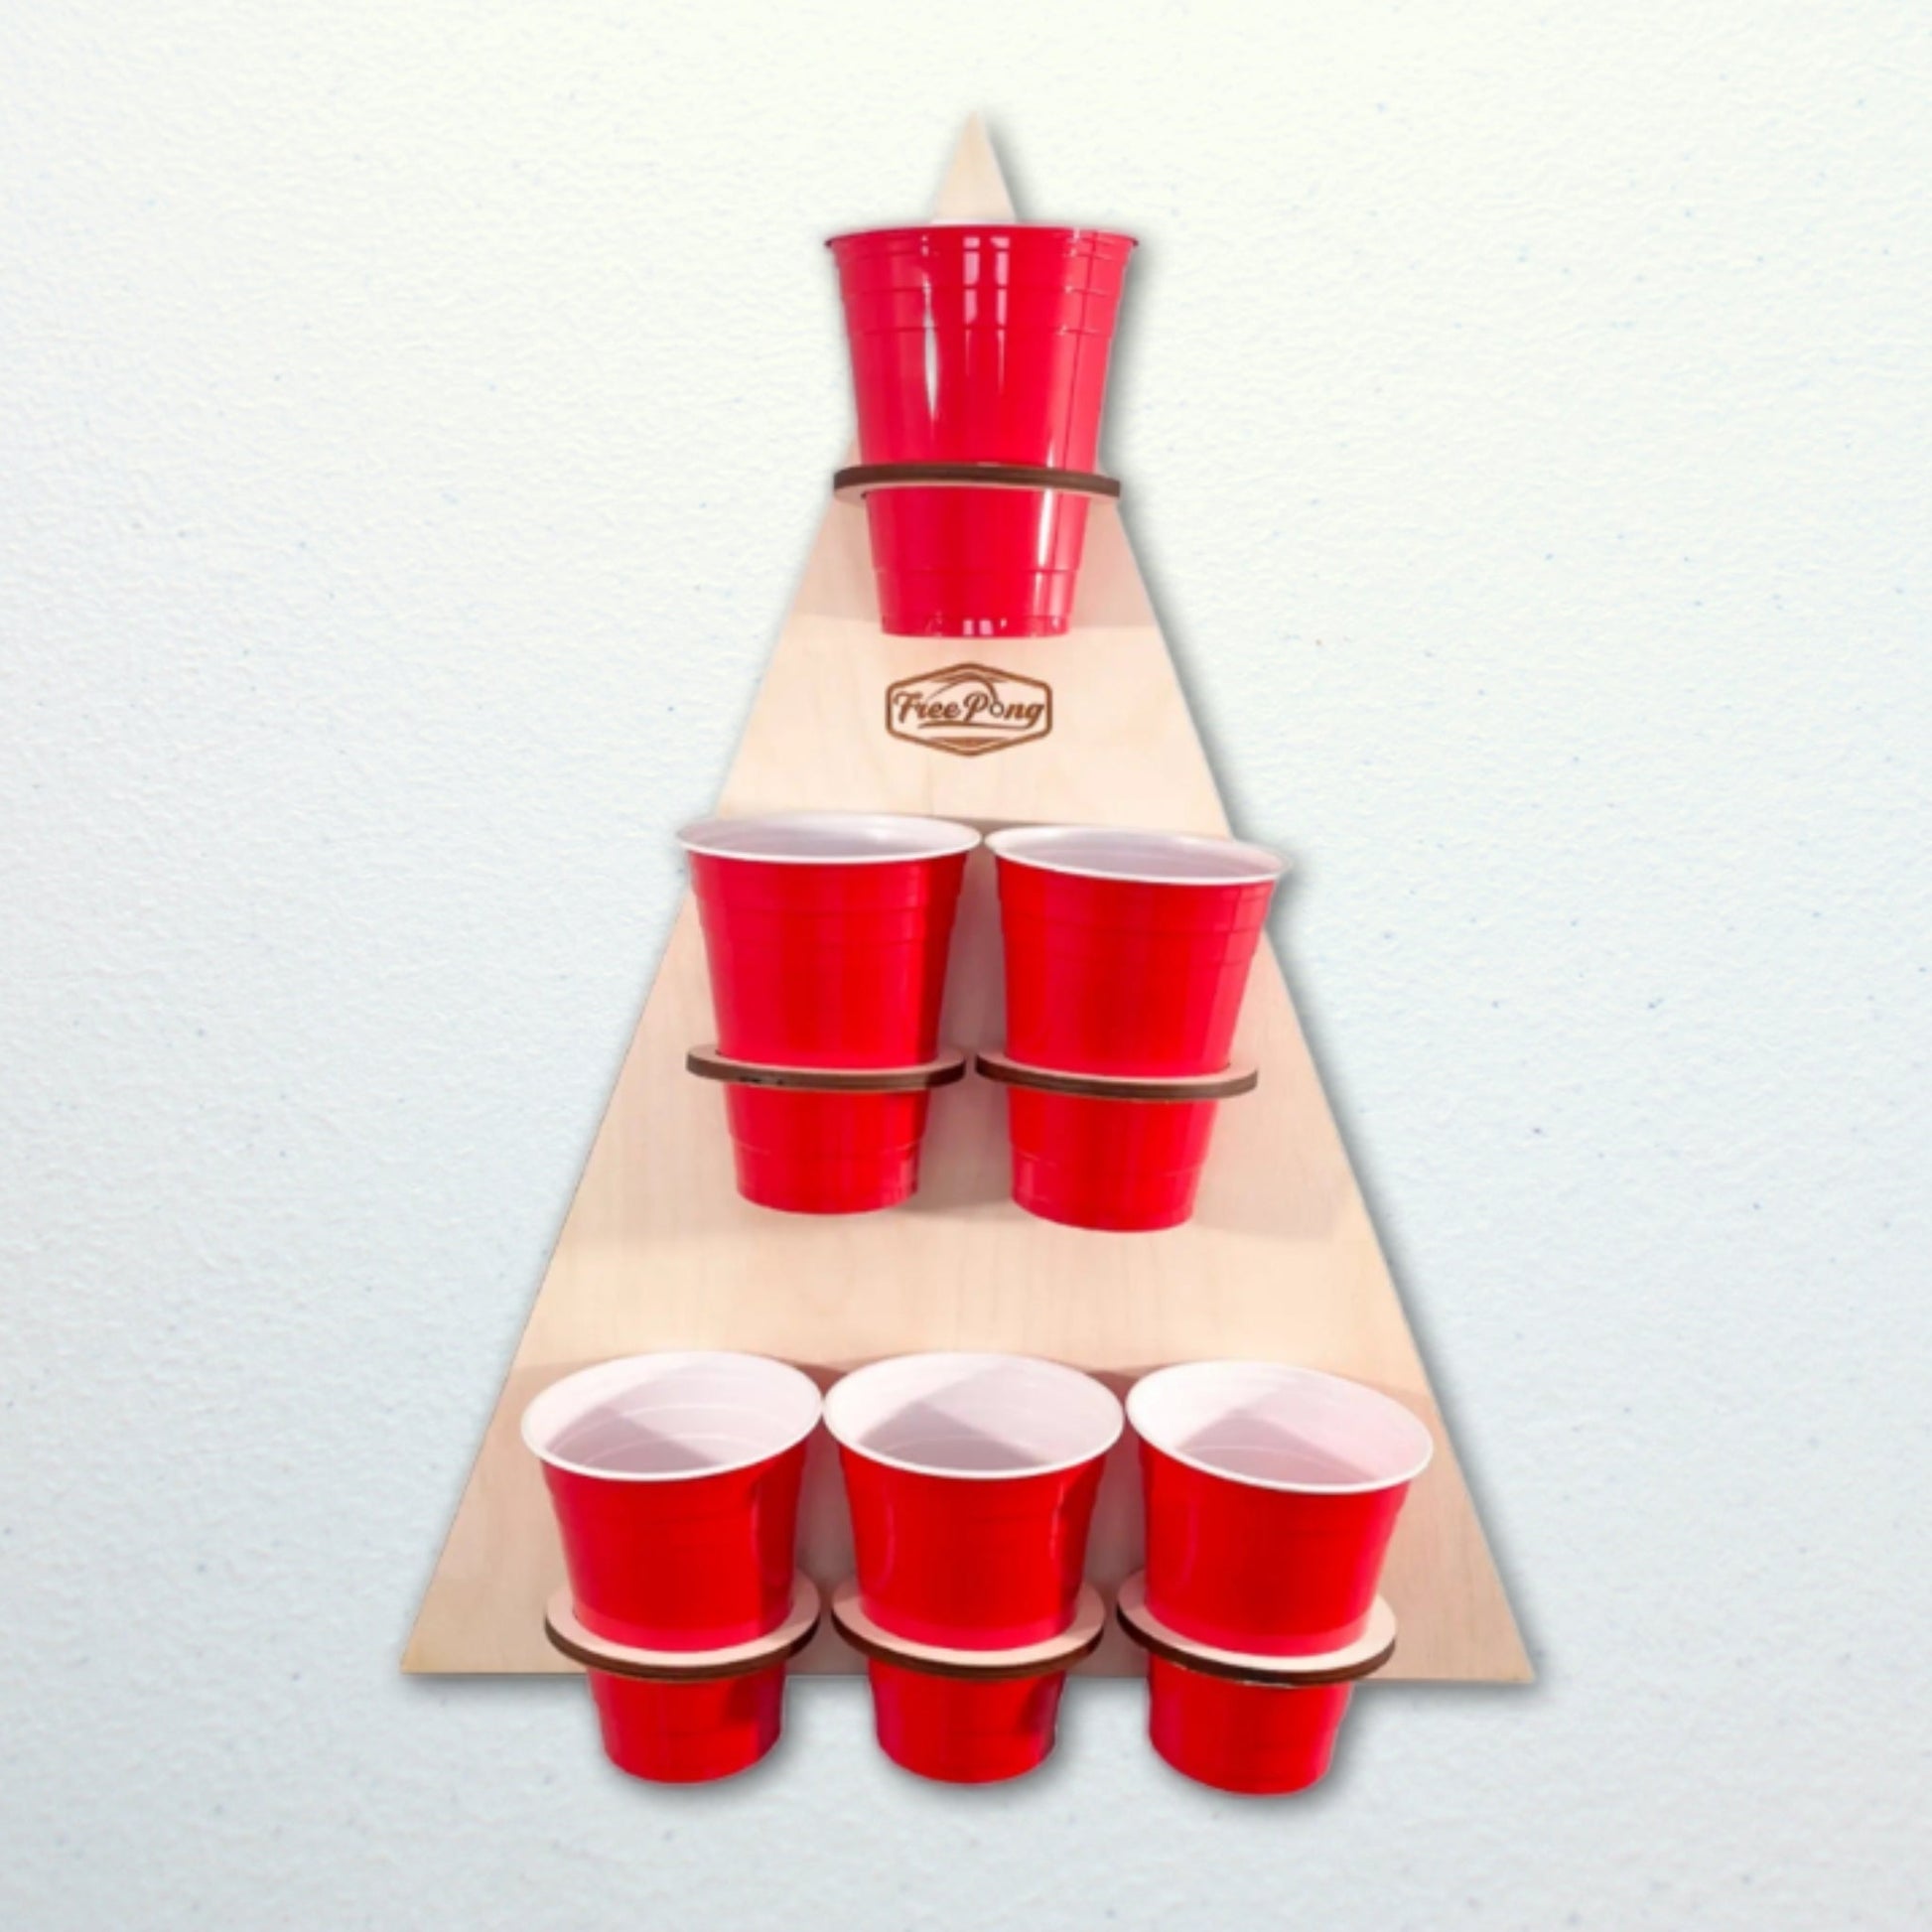 Free Pong - Beer Pong Meets Darts - Made in the USA - , LLC